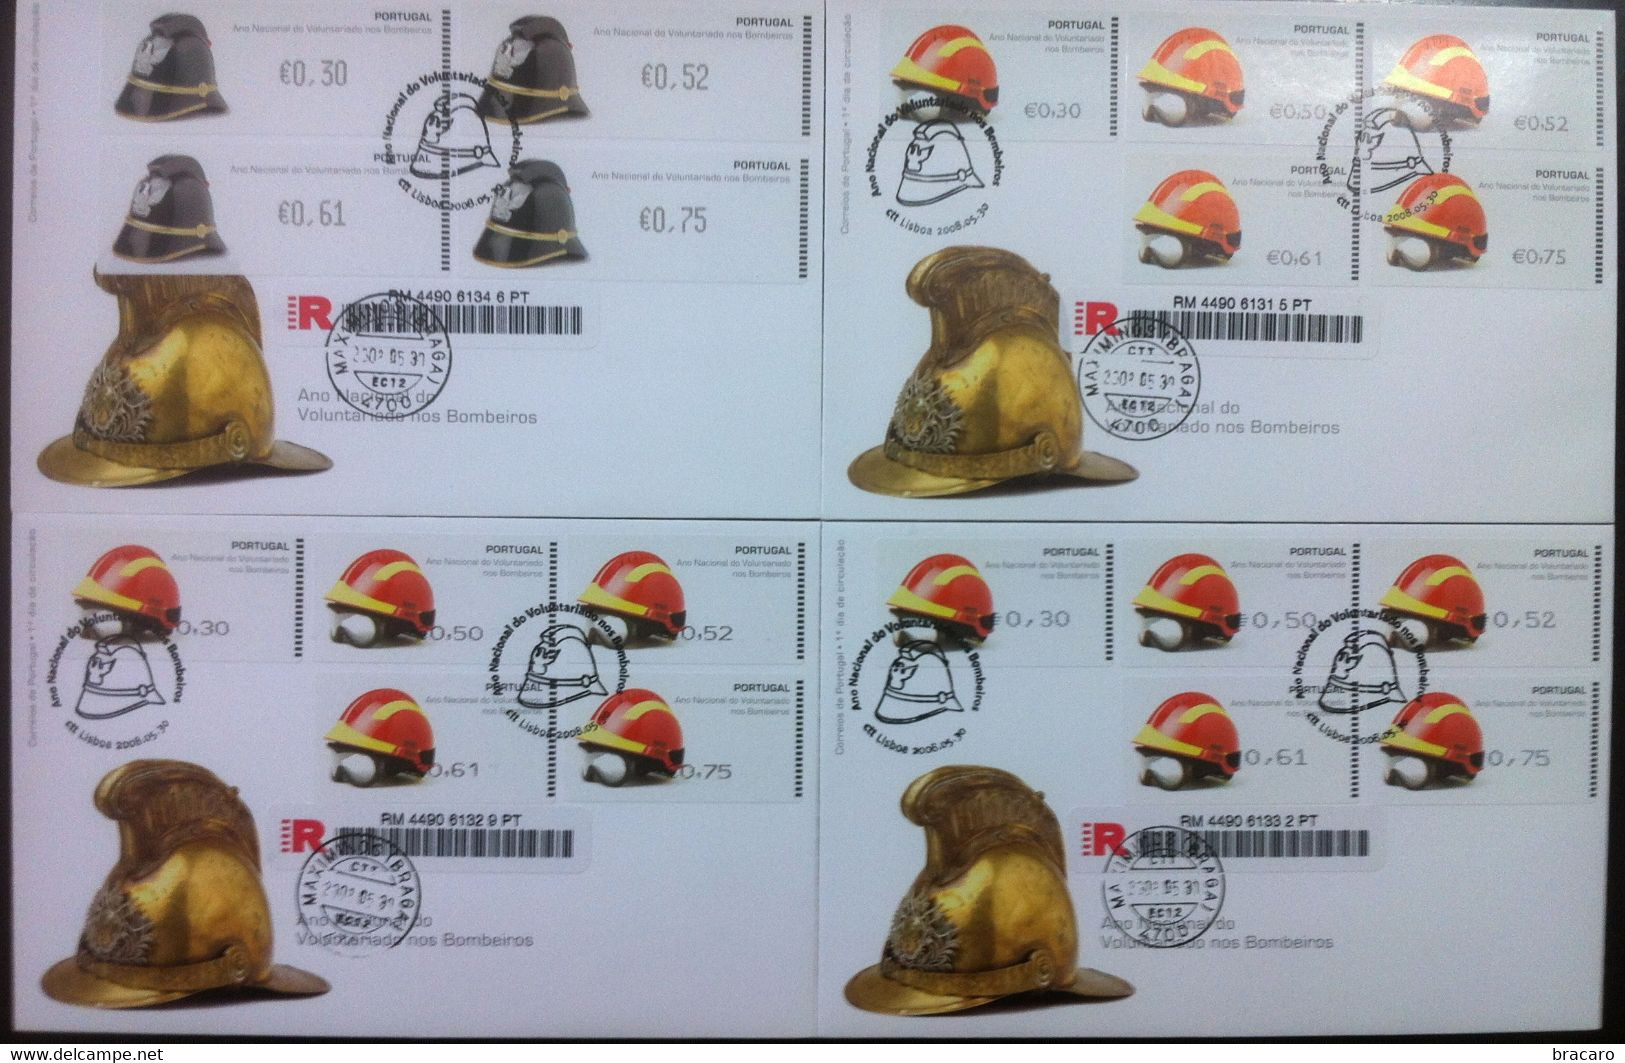 Portugal - ATM Machine Stamps - FDC (cover) X 4 - BOMBEIROS / FIREMEN 2008 - Registered, Cancel Braga - Frankeermachines (EMA)